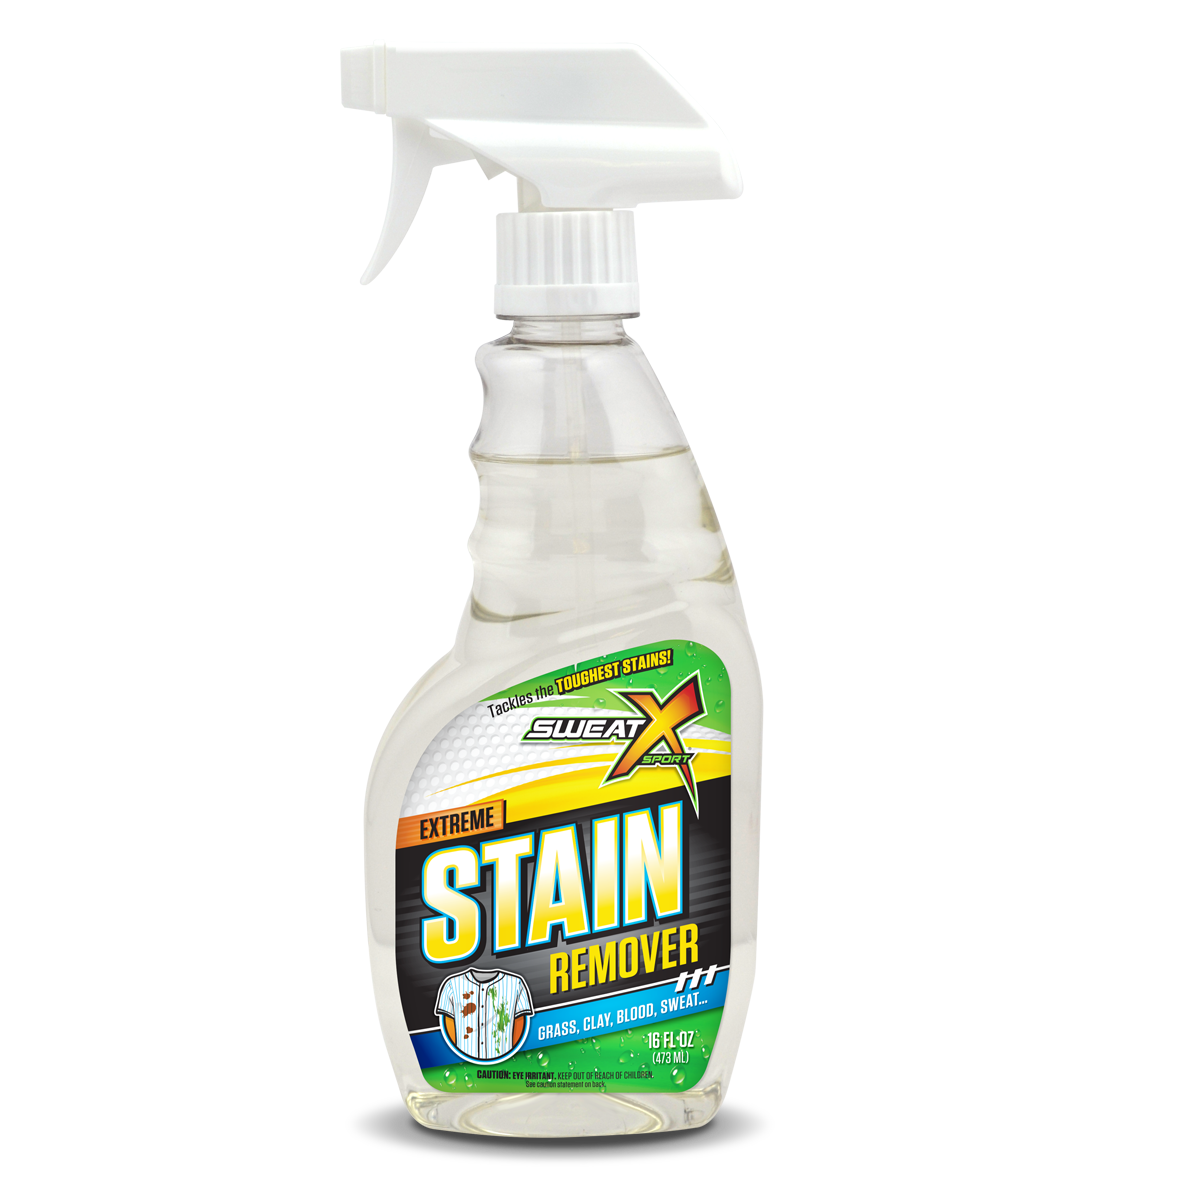 SPRAY 'n WASH 12-fl oz Laundry Stain Remover at